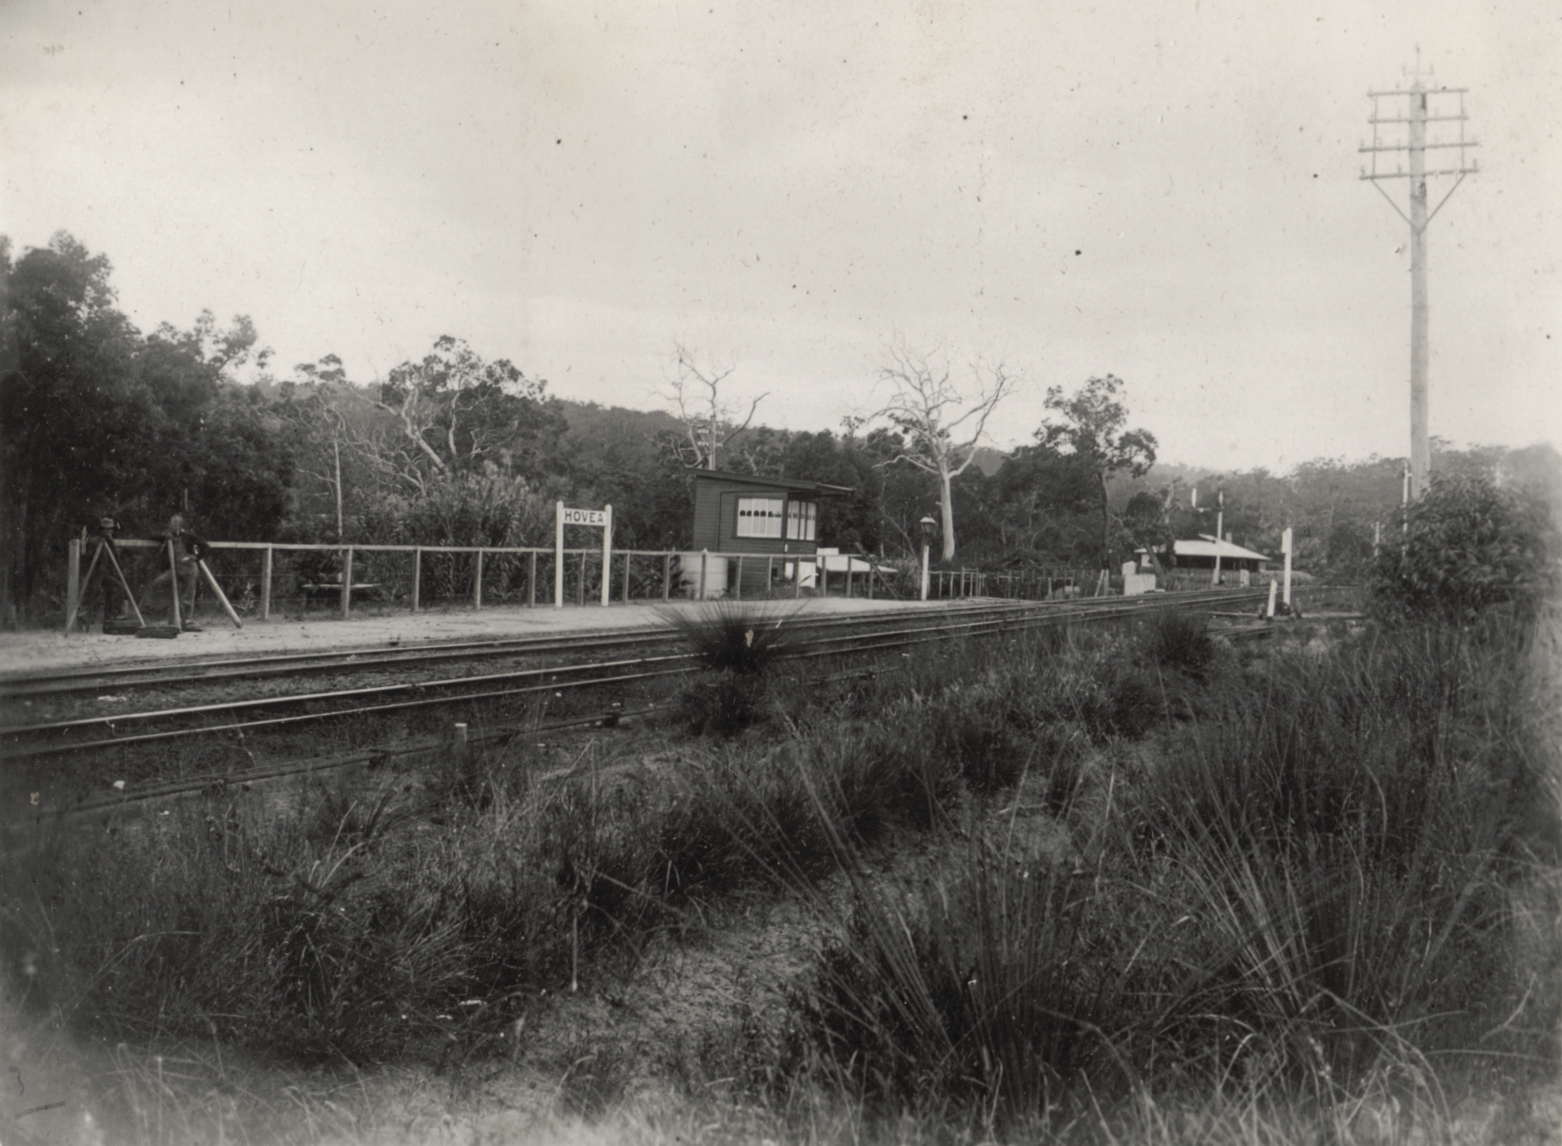 this is a vintage black and white pograph of a train station